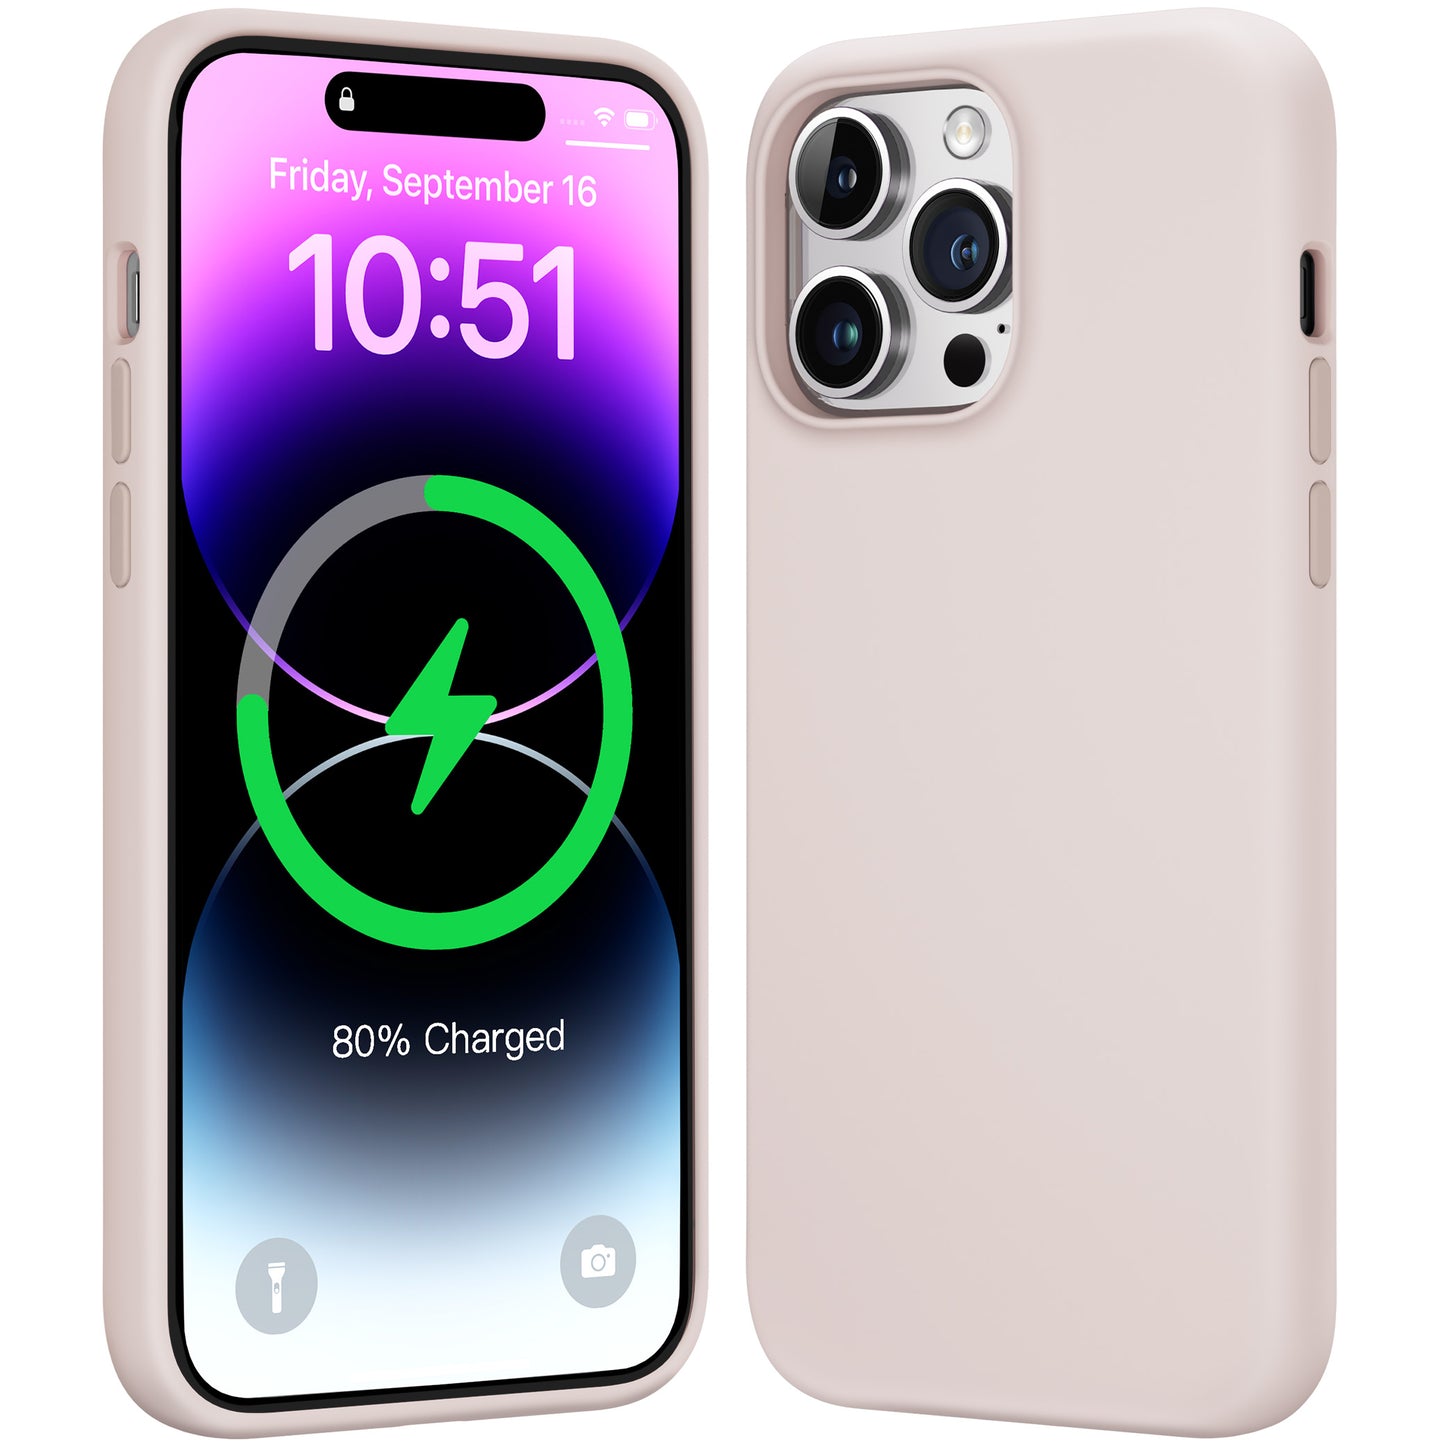 Show Off Your iPhone's Colors With The Liquid Silicone Case